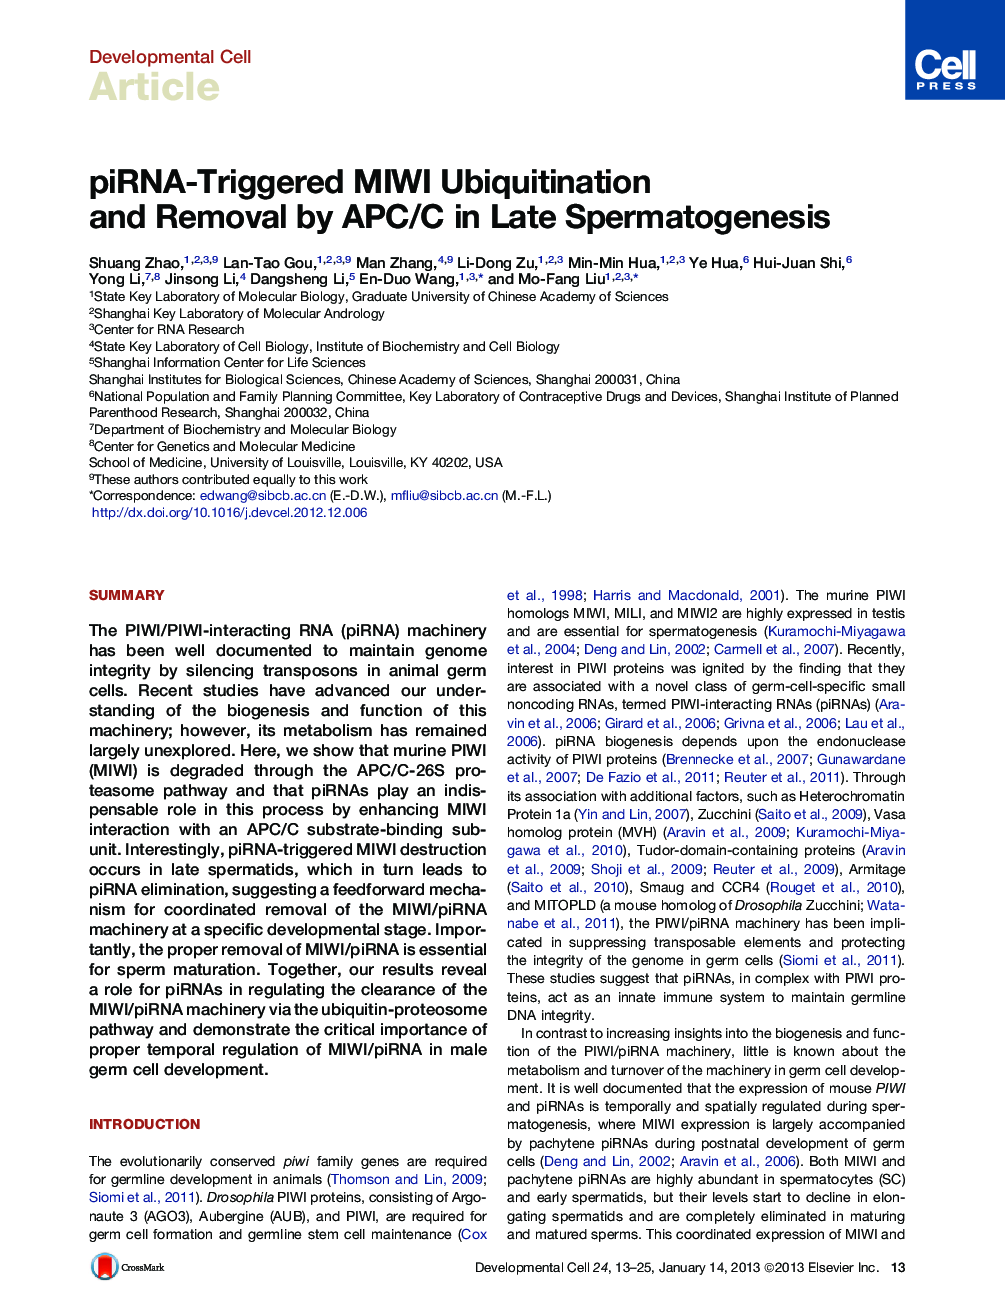 piRNA-Triggered MIWI Ubiquitination and Removal by APC/C in Late Spermatogenesis